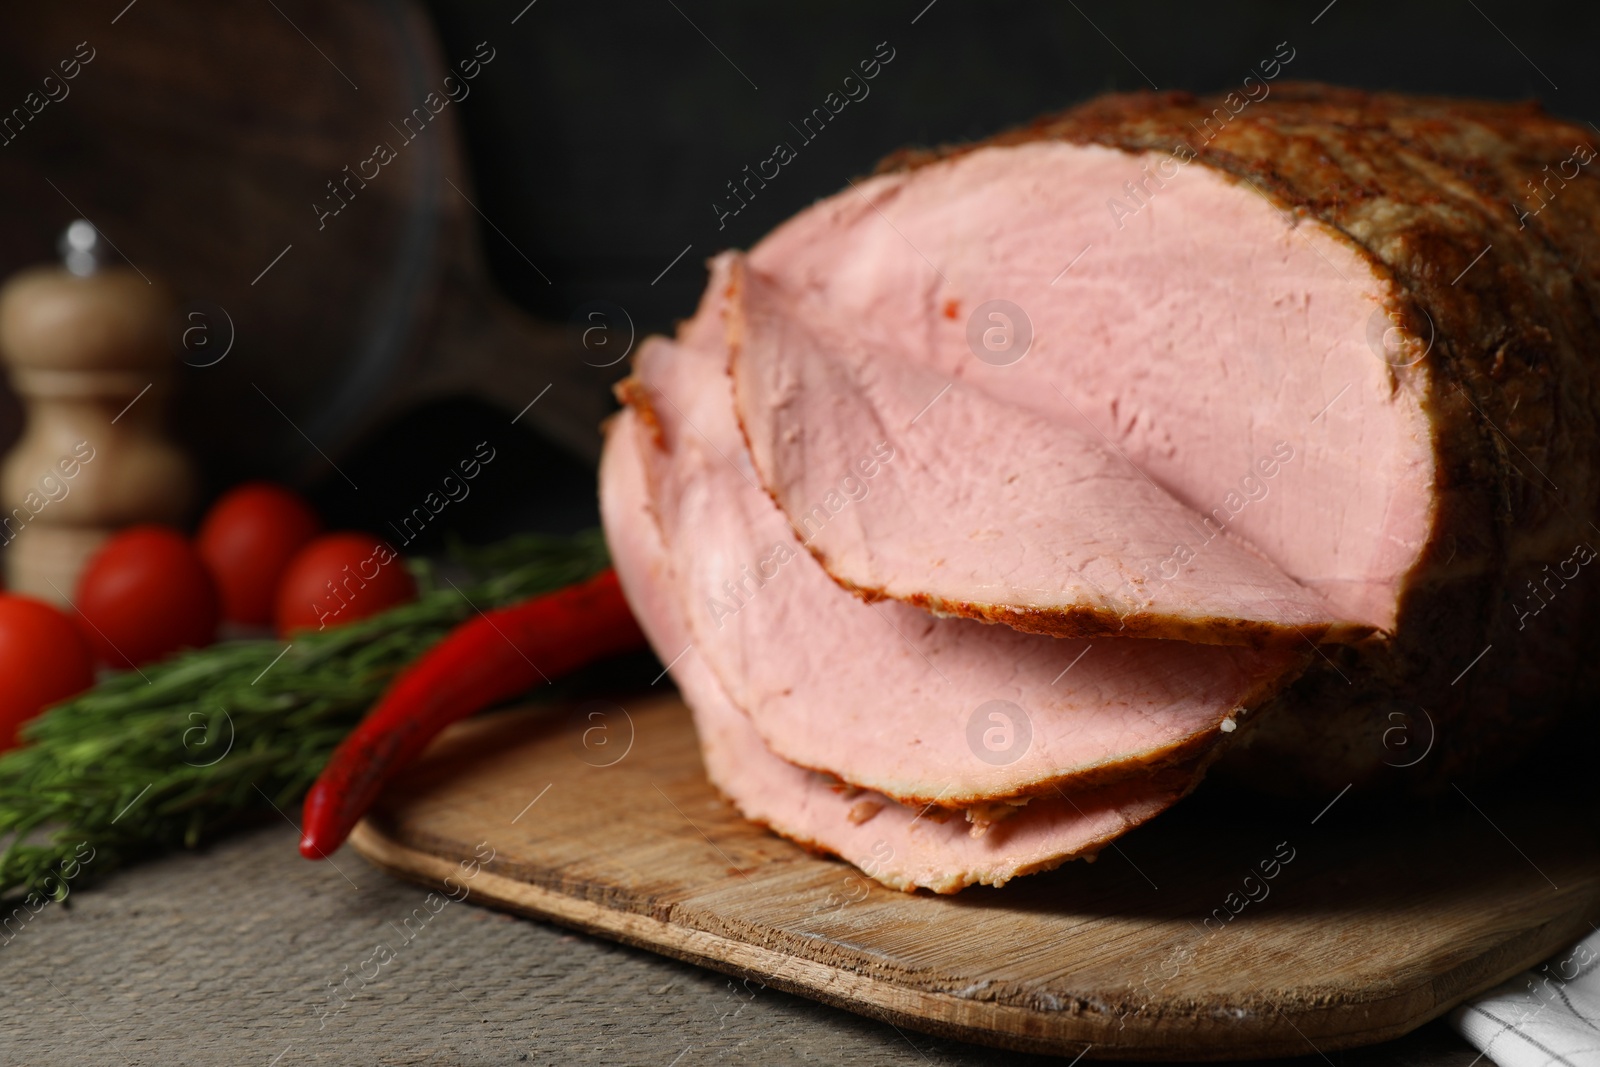 Photo of Delicious baked ham, tomatoes, chili pepper and rosemary on grey wooden table, closeup